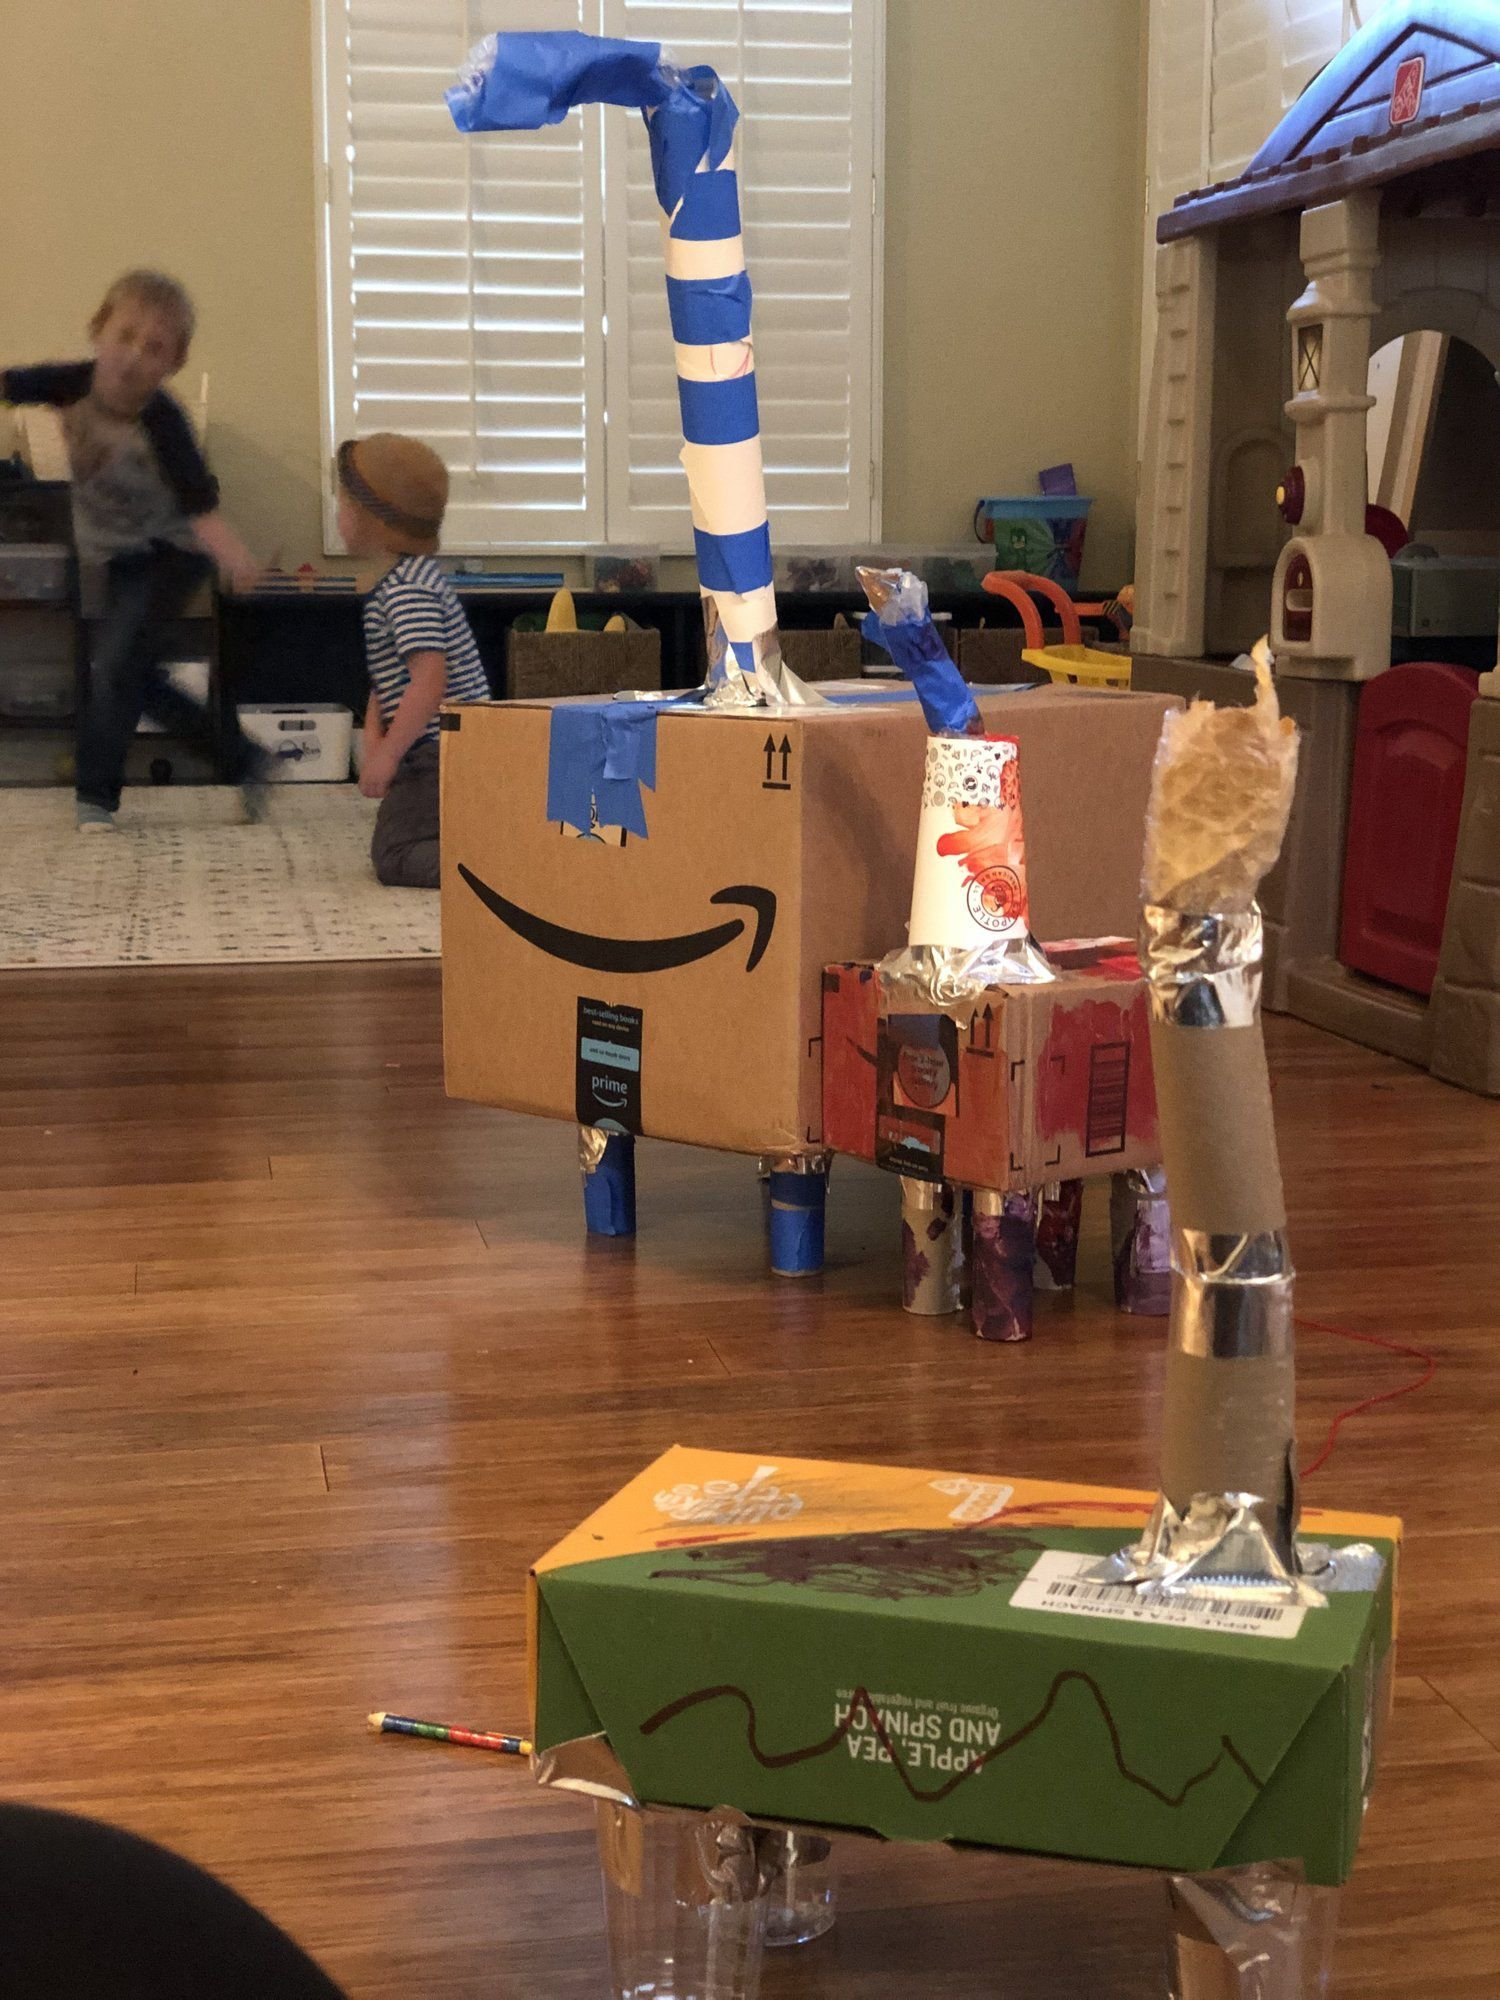 My boys made these “dinosaurs” out of old boxes, duct tape, toilet paper and paper towel holders, old cups, and plastic lining from packages